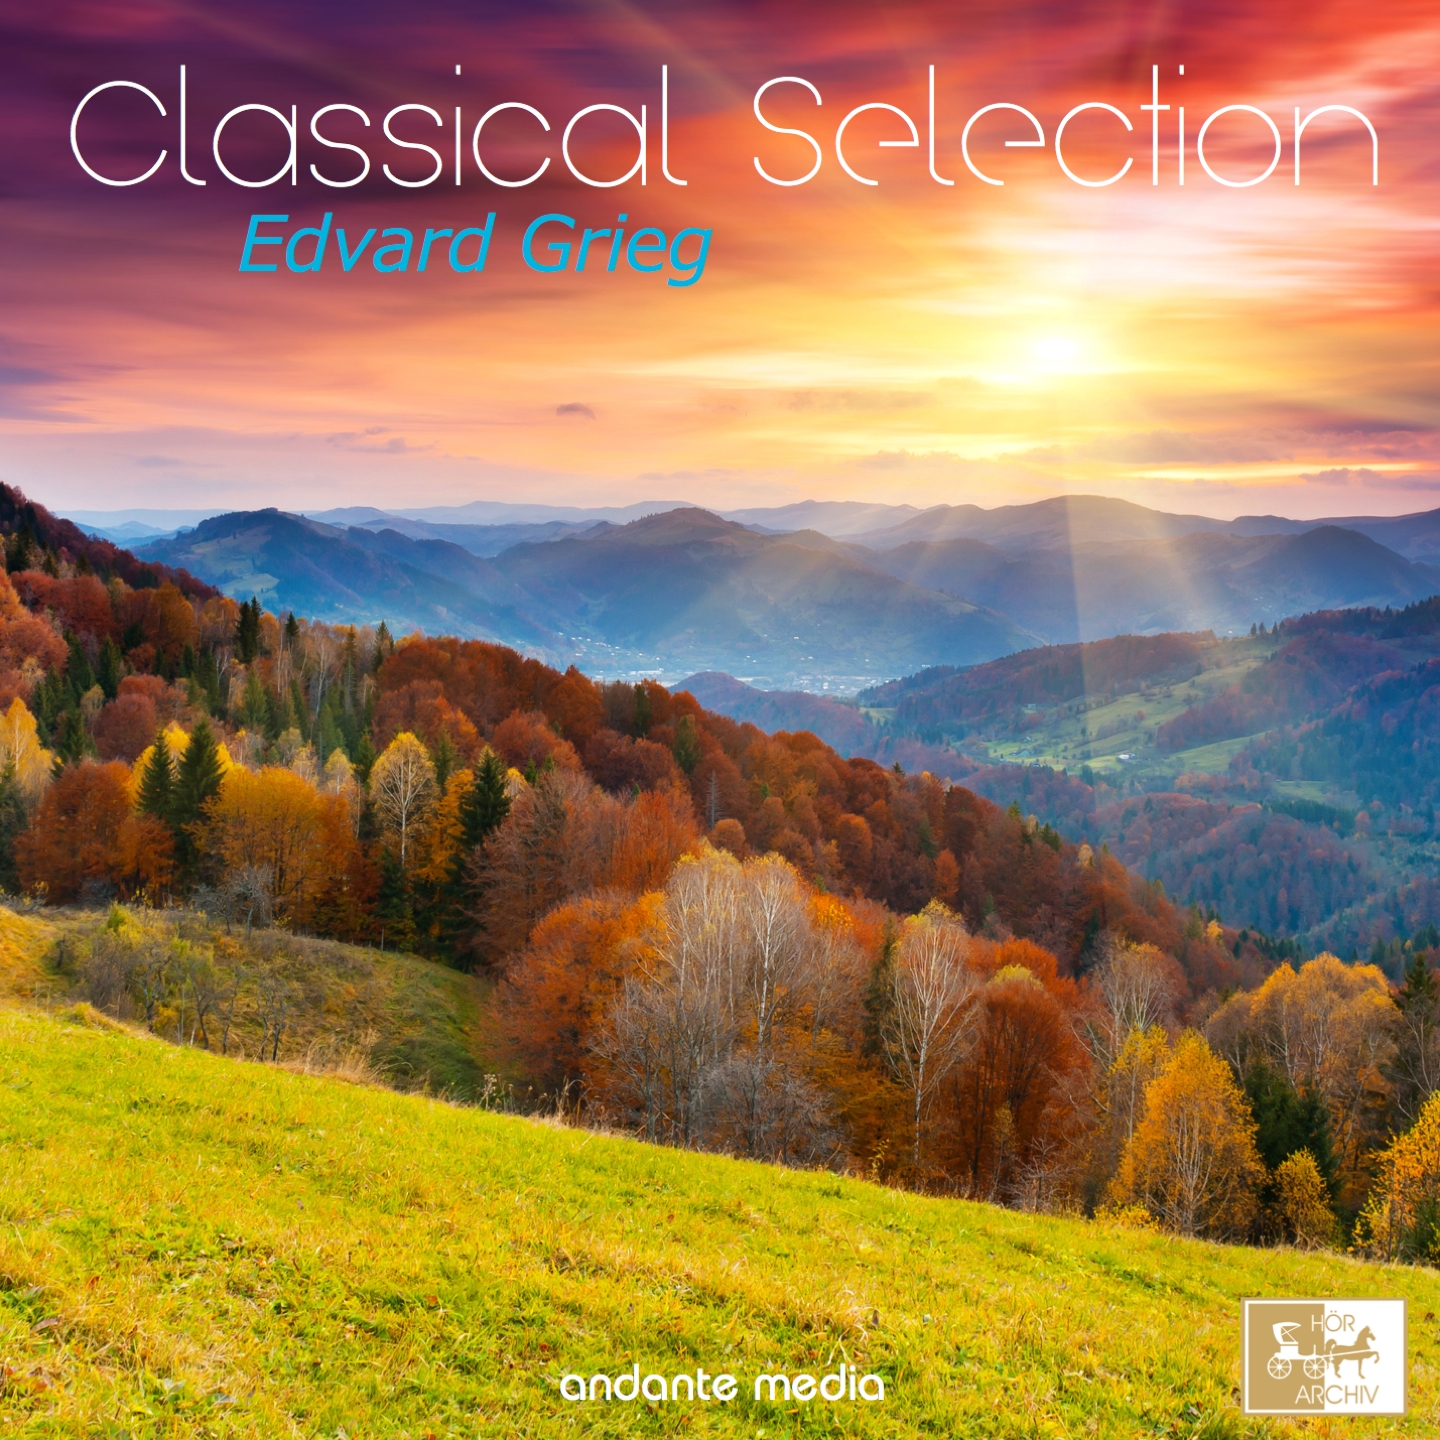 Classical Selection - Grieg: Peer Gynt Suites Nos. 1 & 2